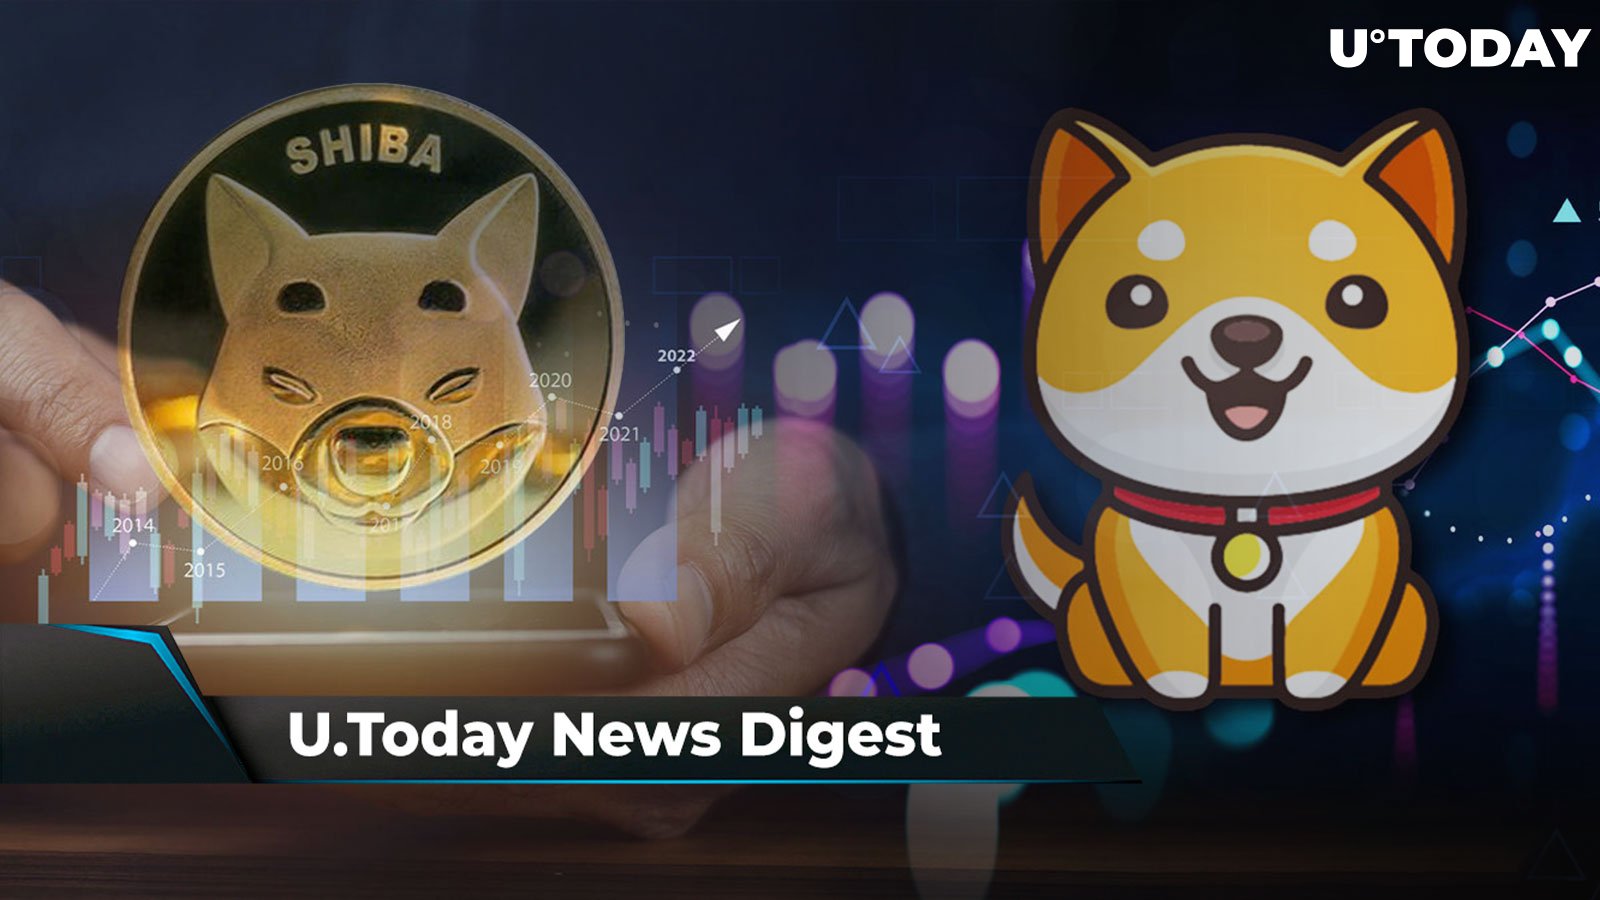 SHIB Hits Big New Milestone, Baby Doge Coin Spikes Briefly on Listing News, XRP to Become Available for Fiat Purchases in UK and France: Crypto News Digest by U.Today